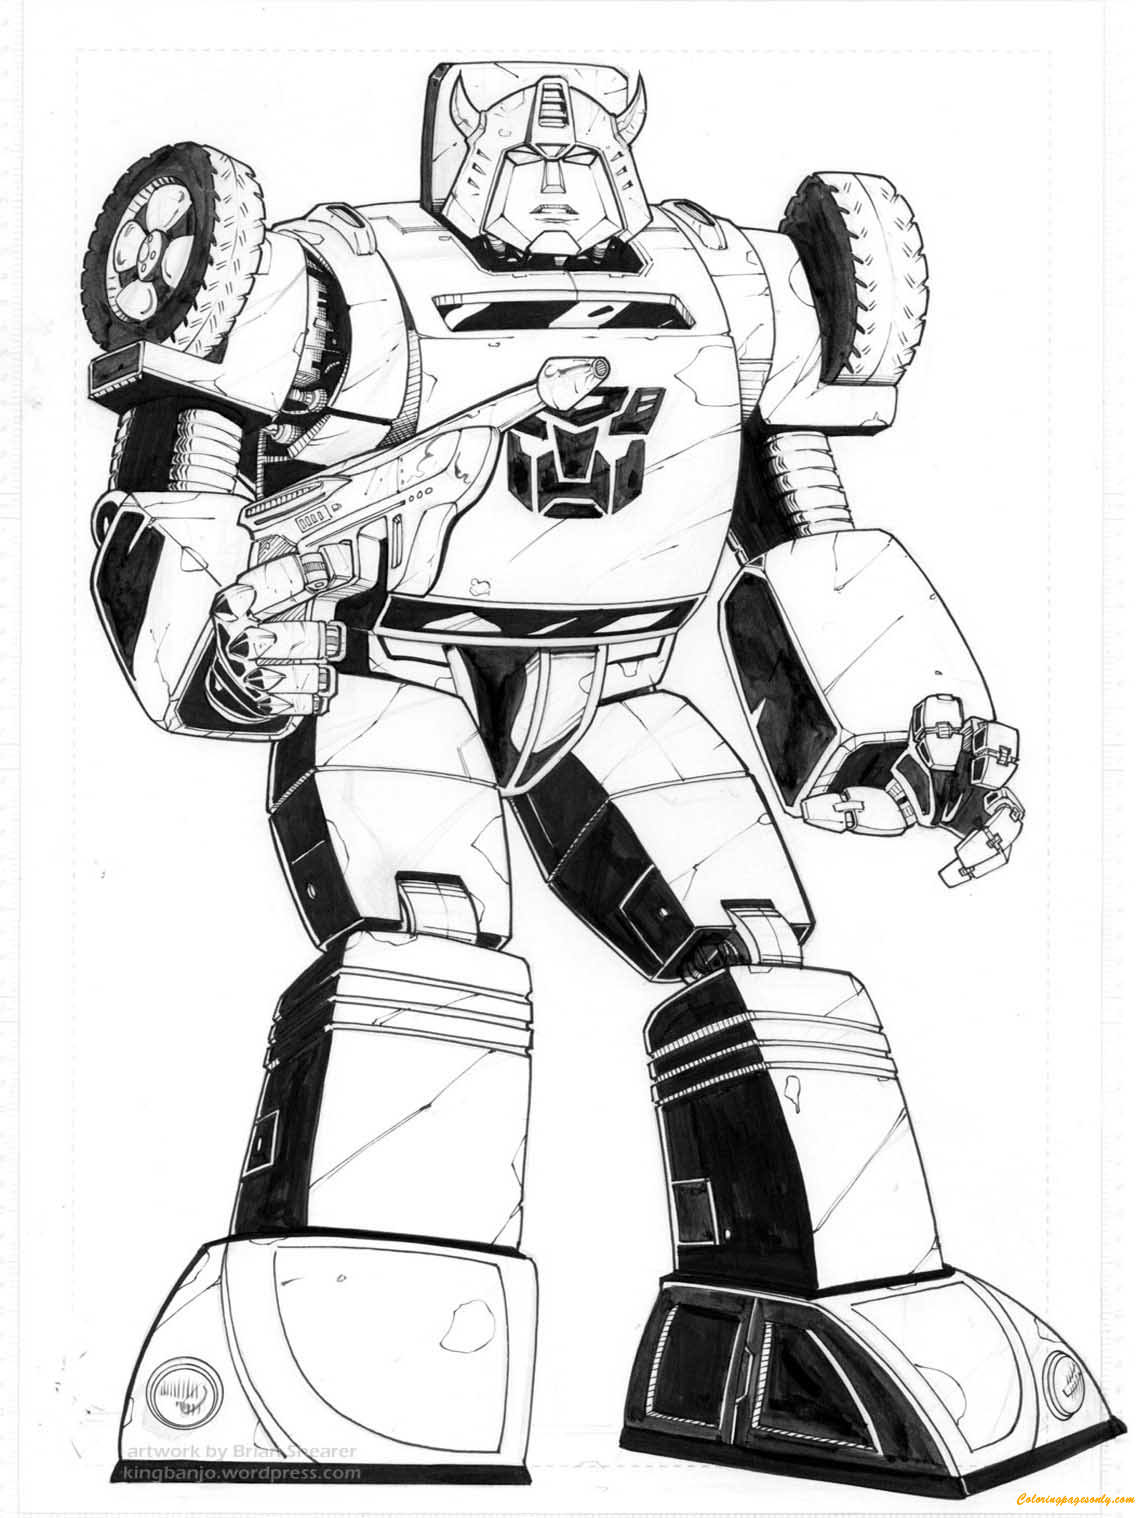 Download Bumblebee From Transformers Coloring Page - Free Coloring ...